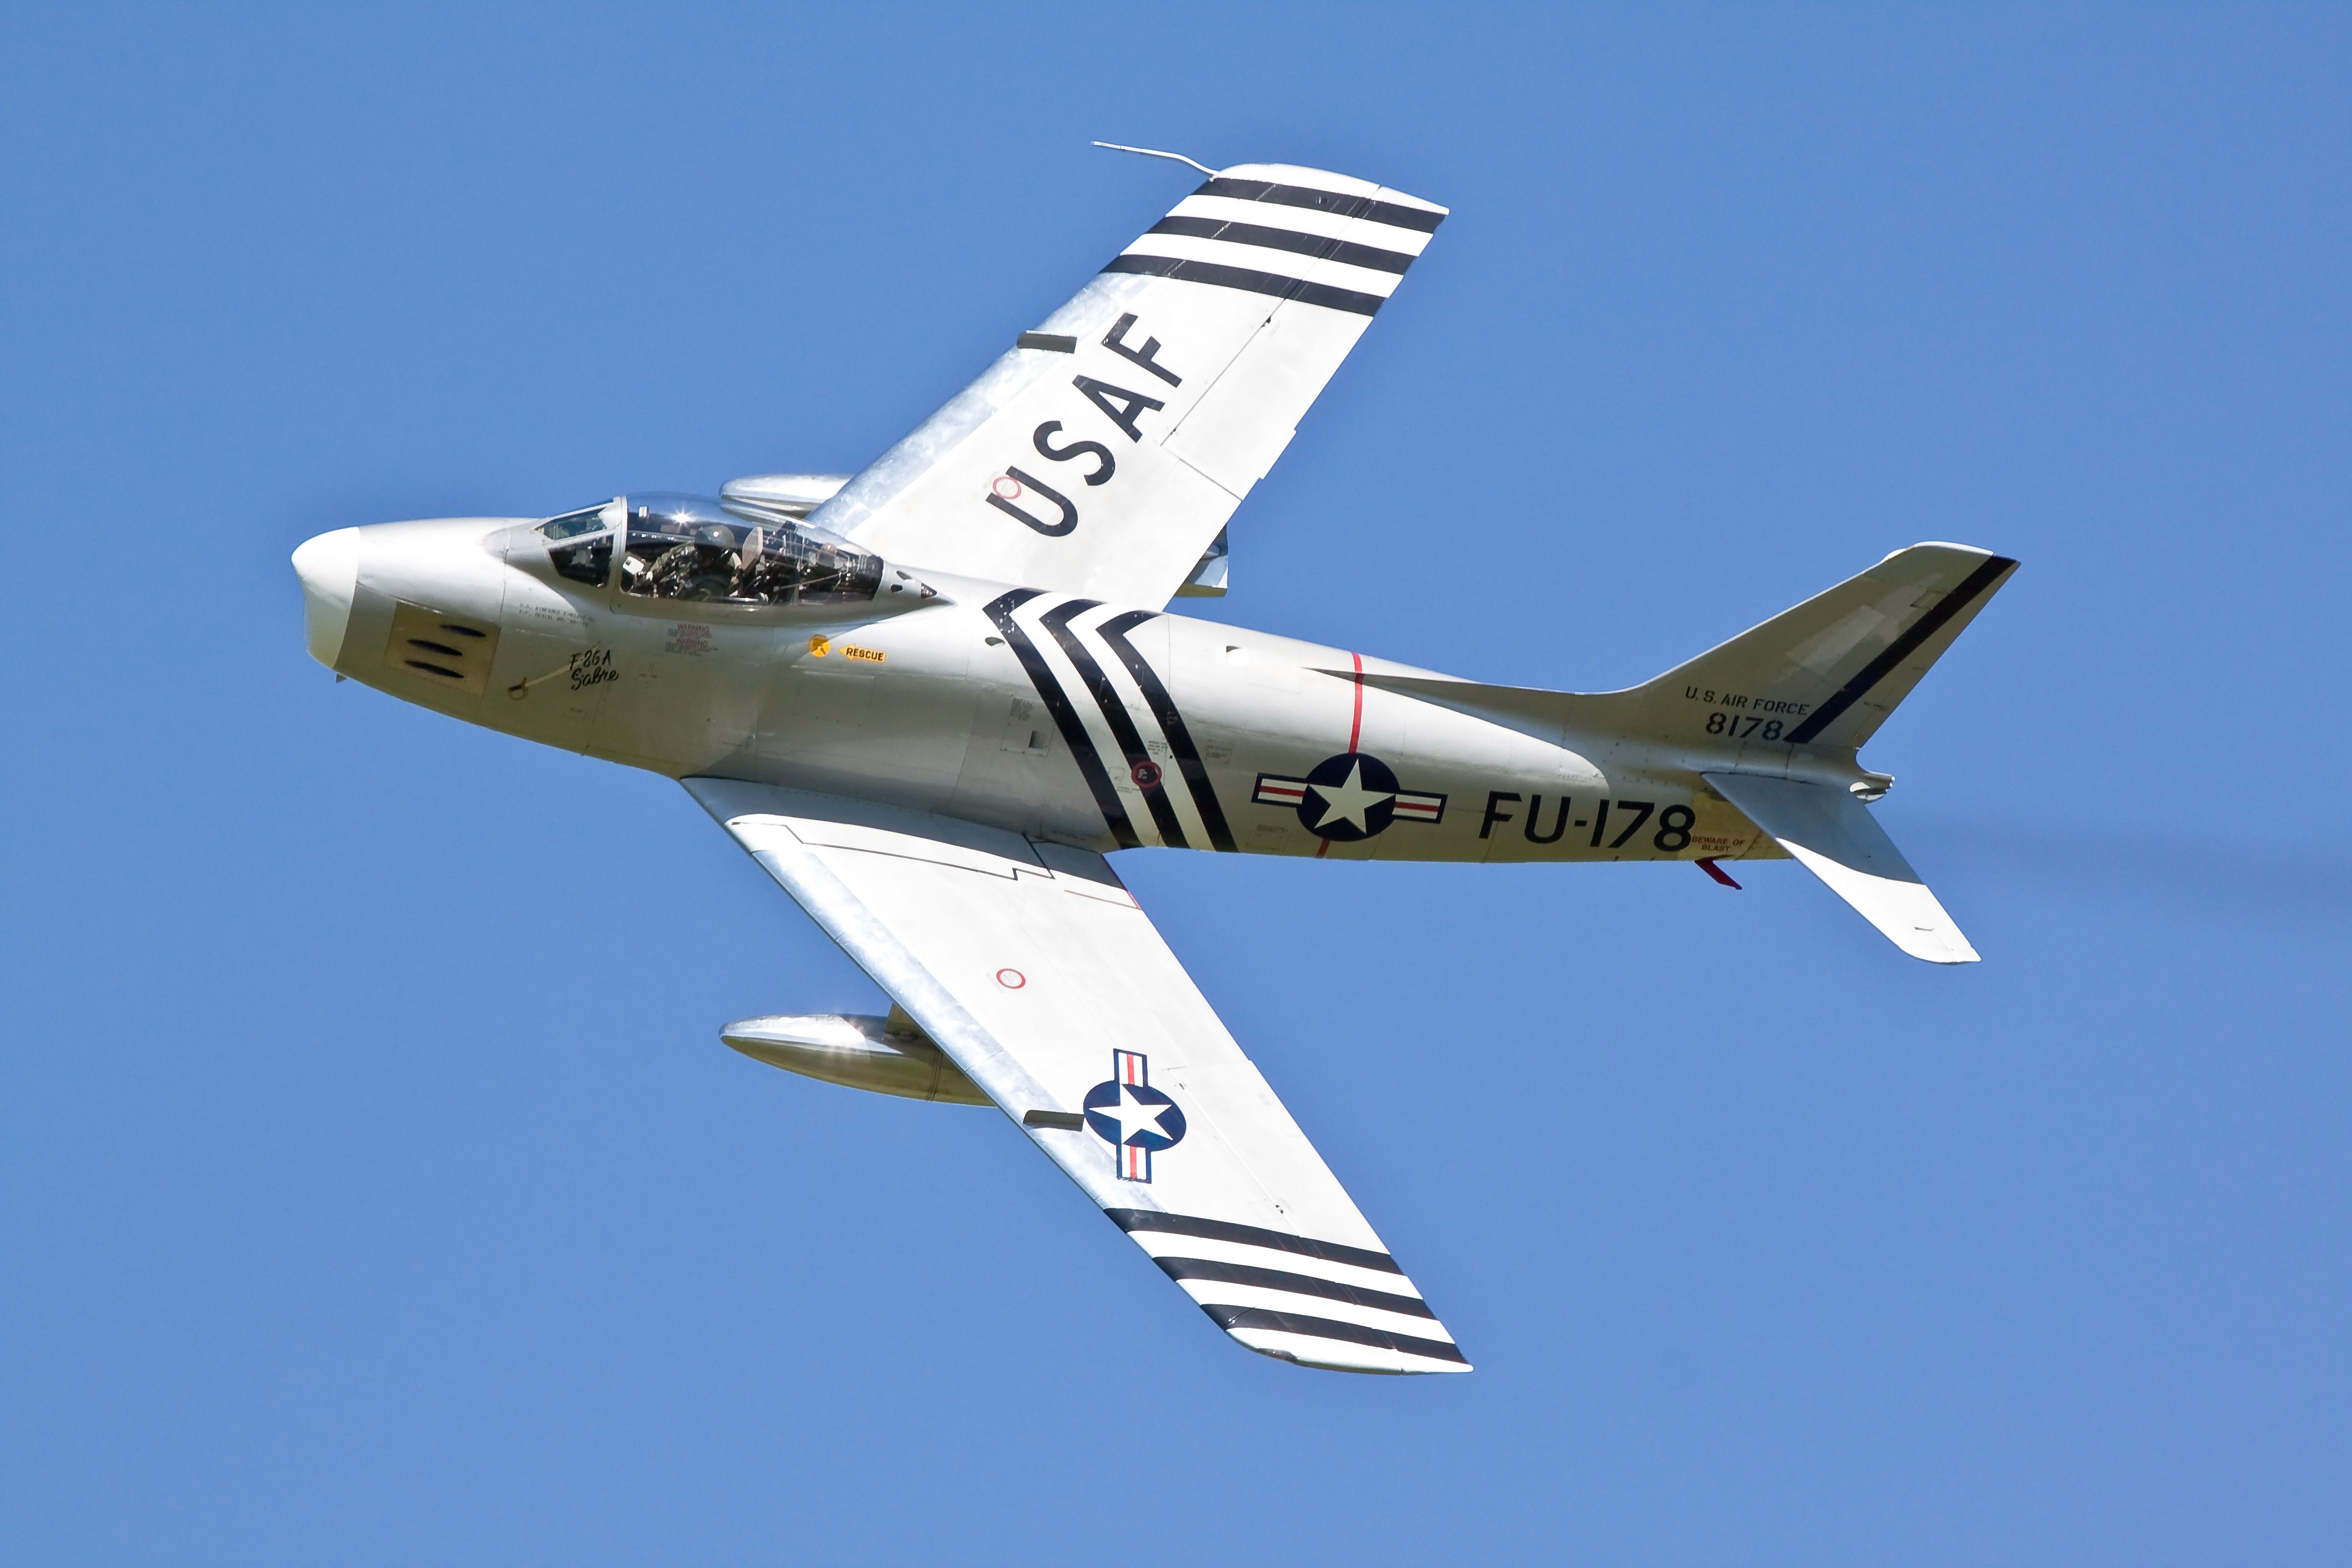 An F-86A Sabre flying in the sky.